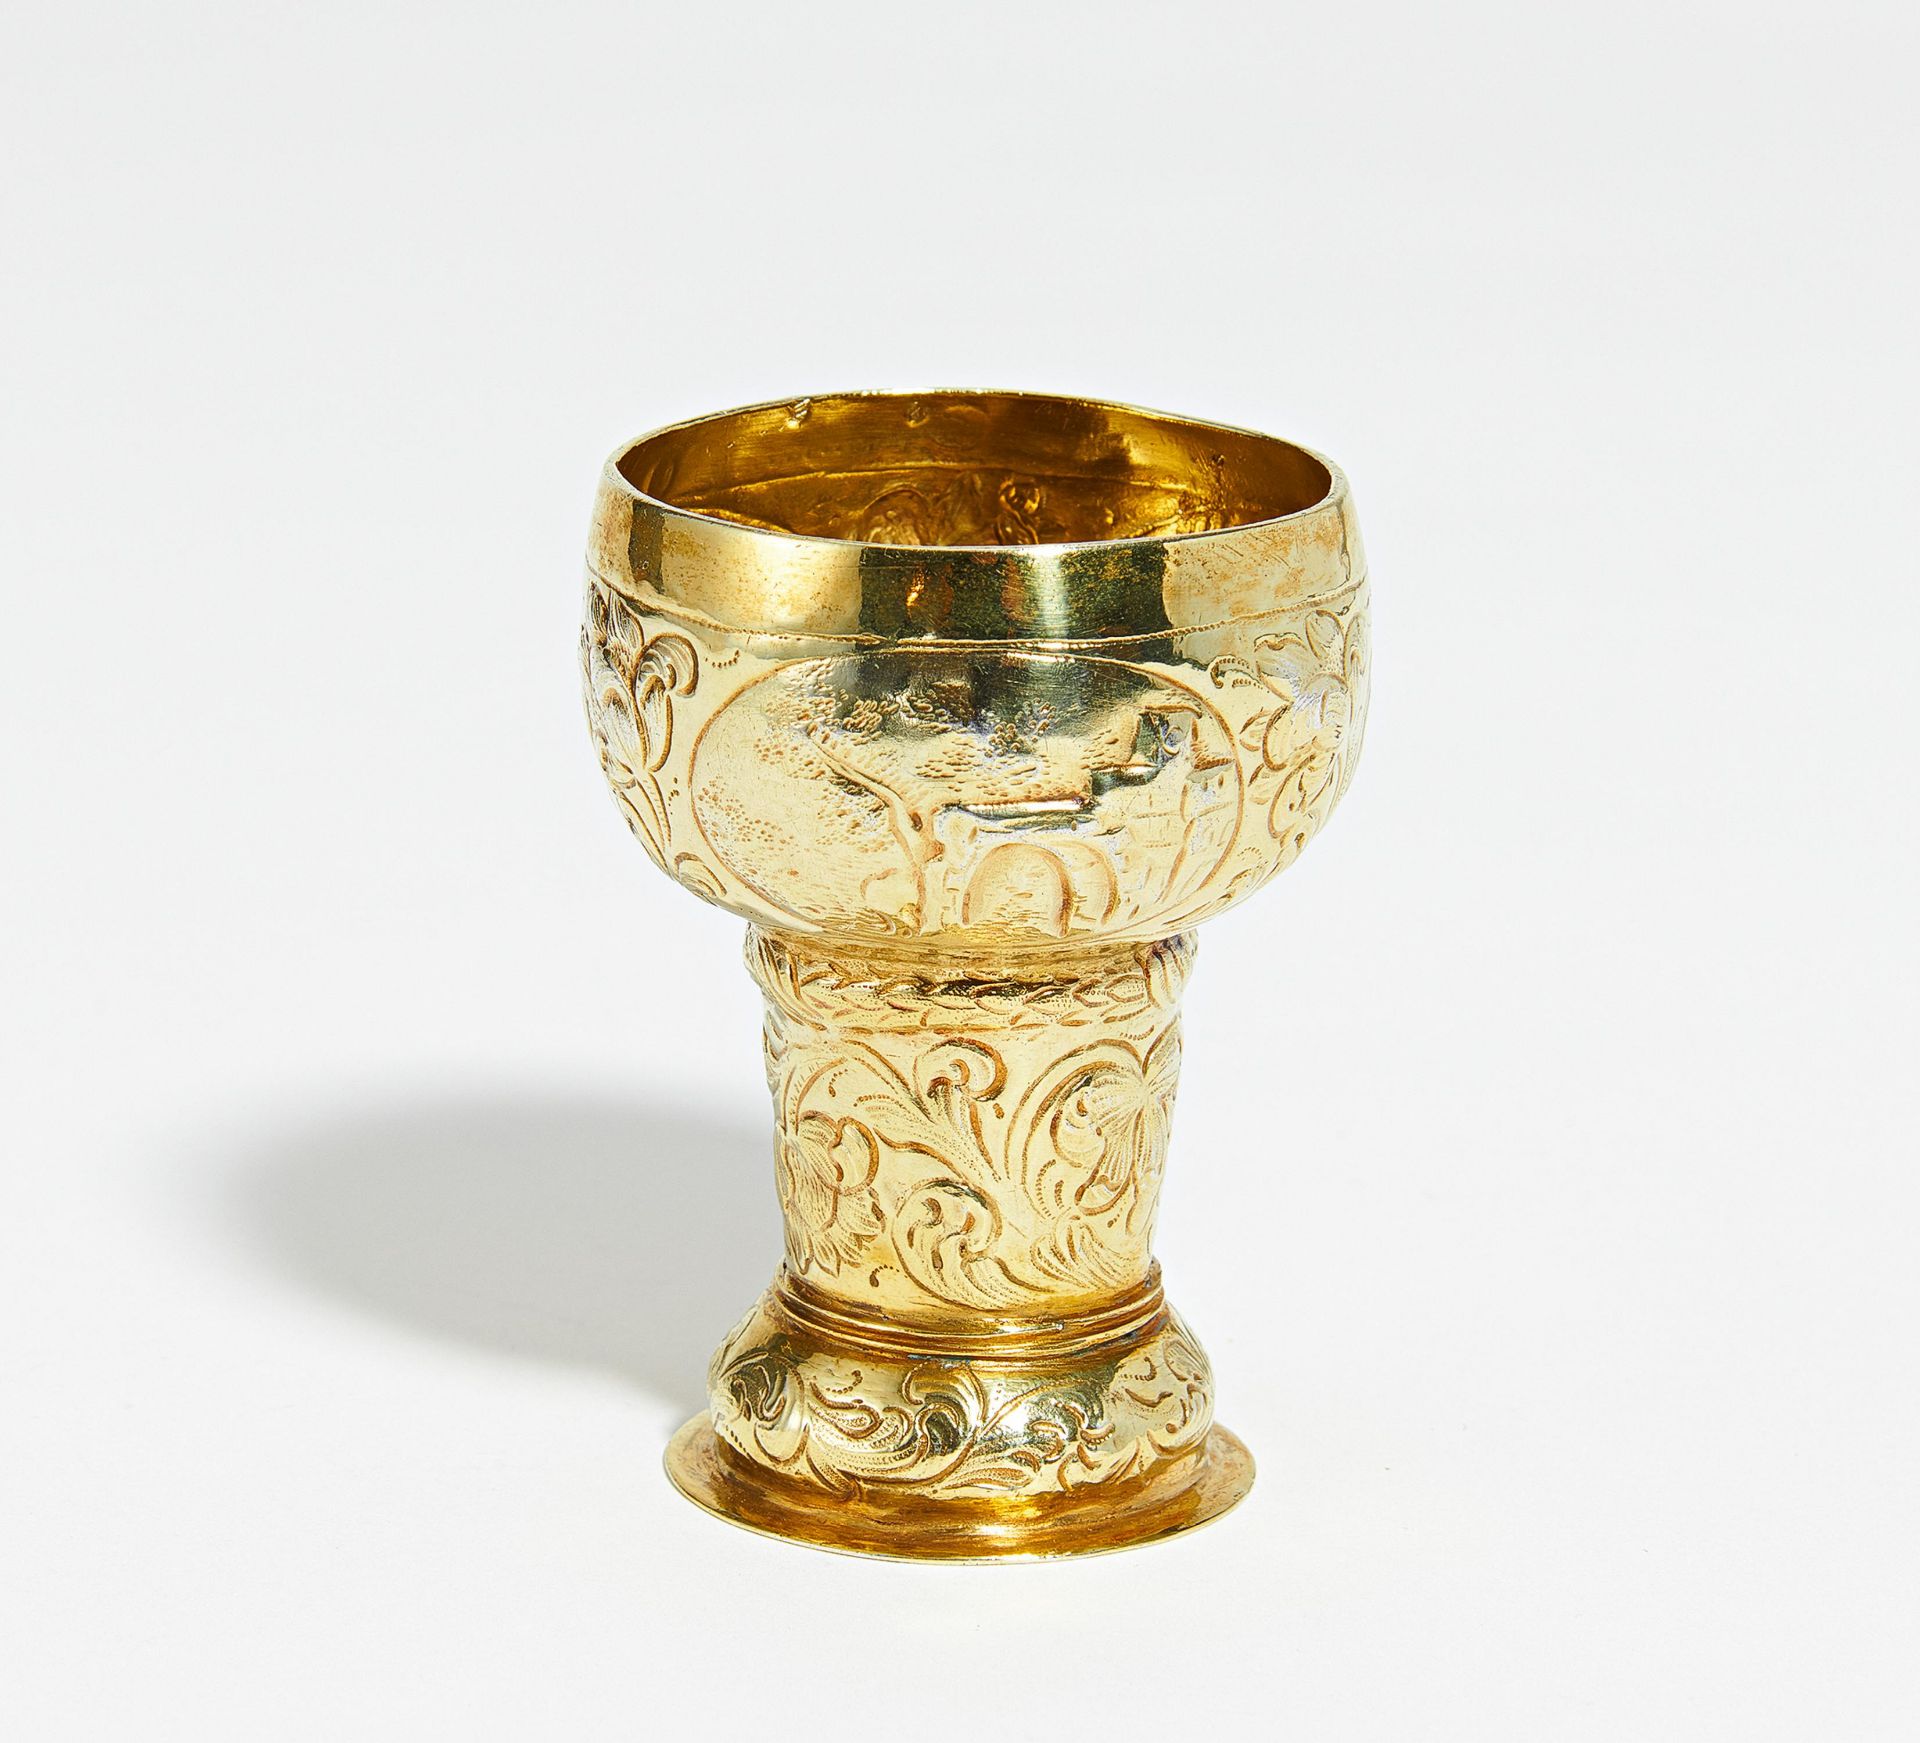 Small vermeil beaker (Roemer) with landscape reserves